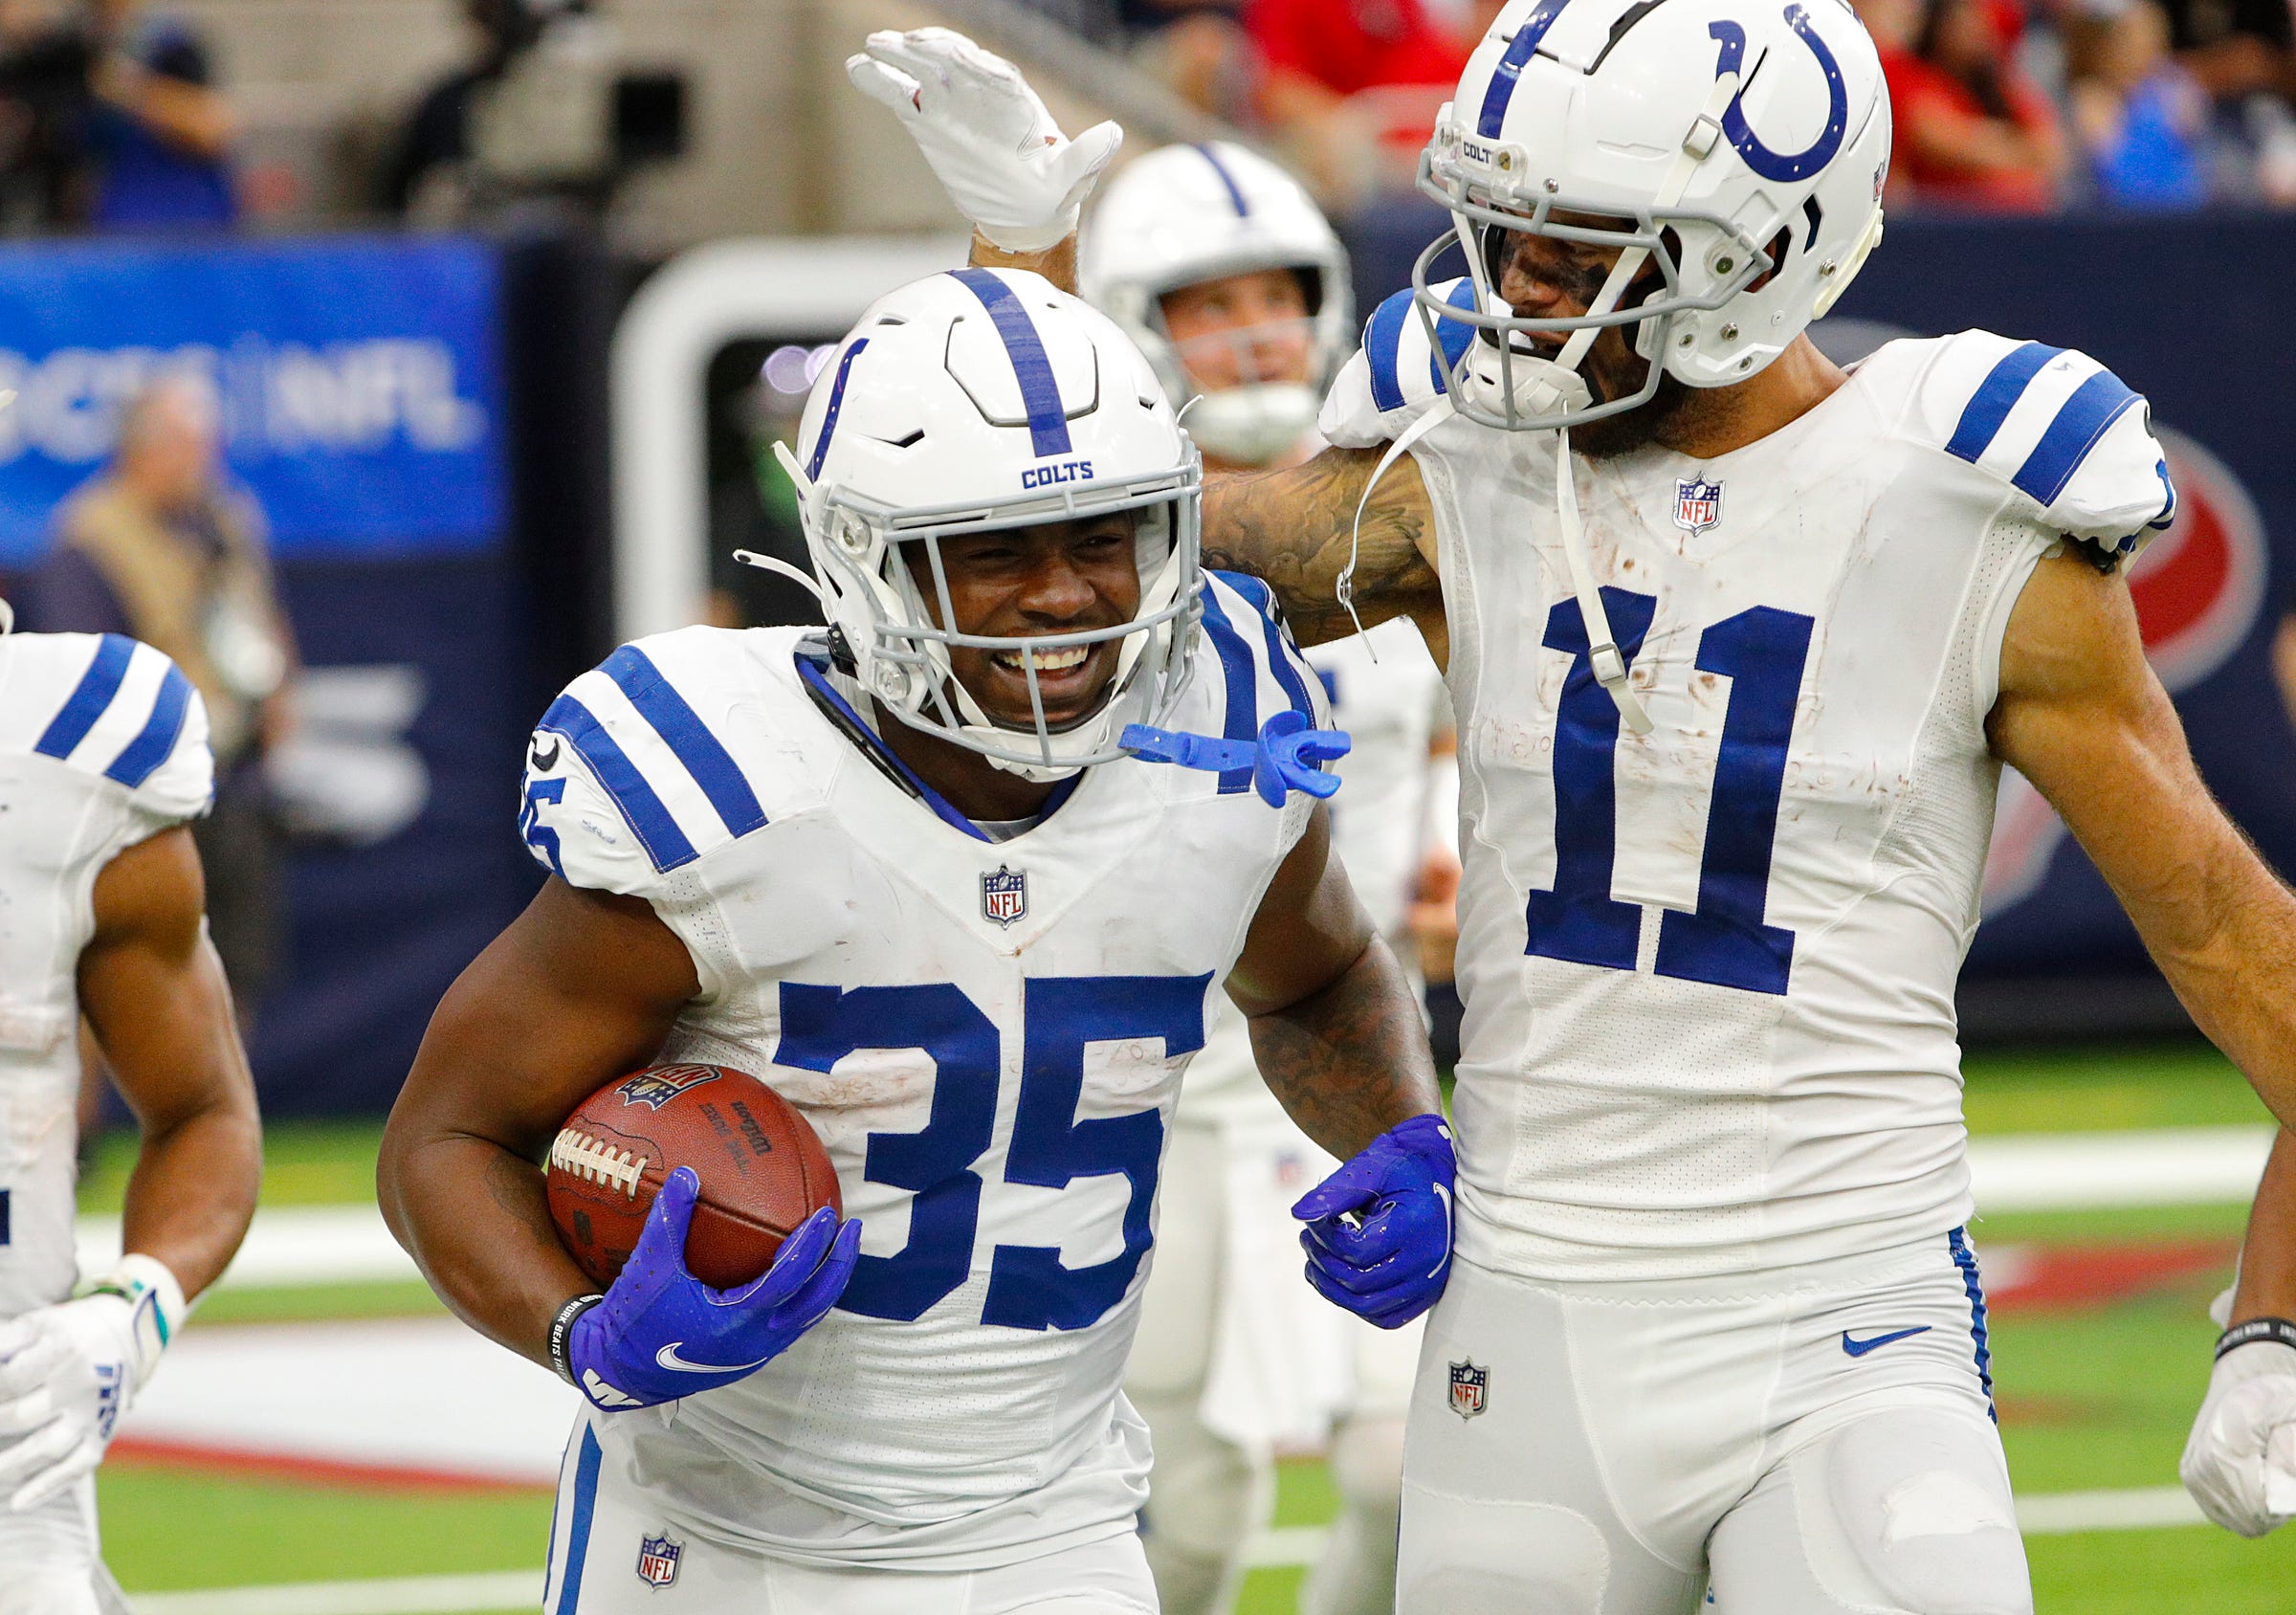 Indianapolis Colts running back Deon Jackson (35) is congratulated by wide receiver Michael Pittman (11) after Jackson scored a touchdown during the fourth quarter of the game Sunday, Dec. 5, 2021, at NRG Stadium in Houston. Indianapolis Colts Versus Houston Texans On Sunday Dec 5 2021 At Nrg Stadium In Houston Texas